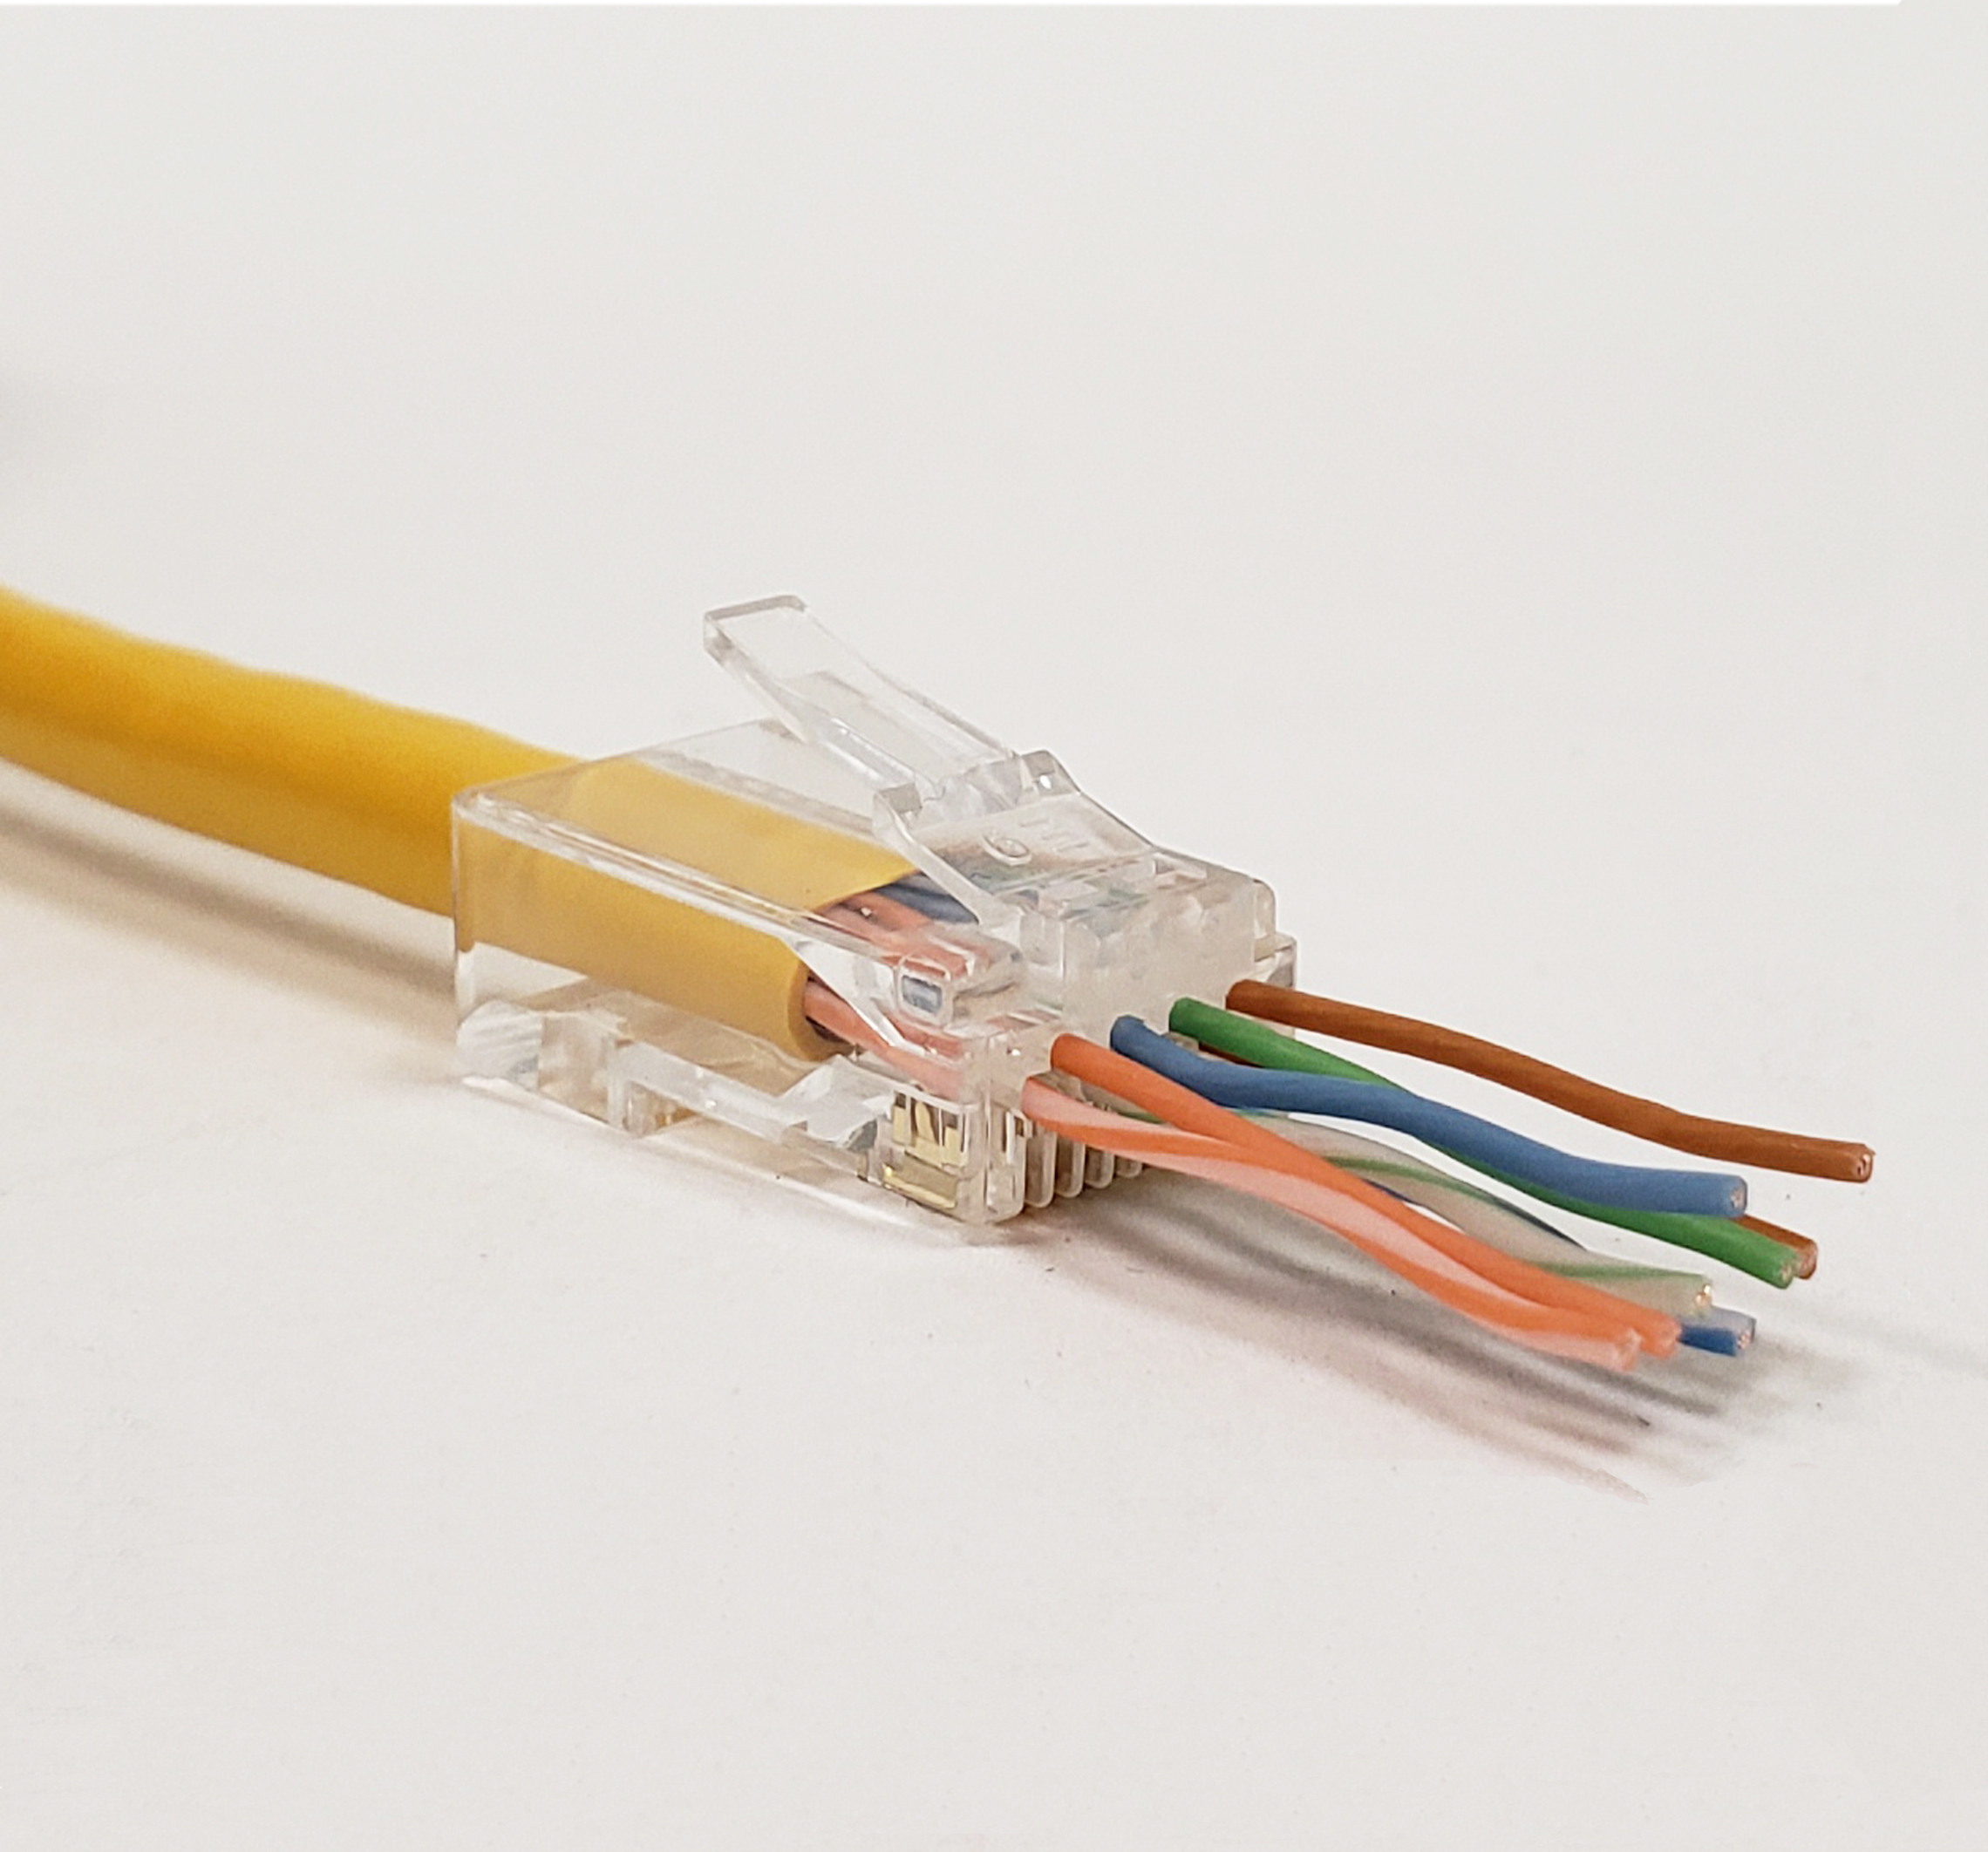 RJ45 CAT6 PASS-THROUGH SOLID OR STRANDED CONNECTOR (50/BAG)